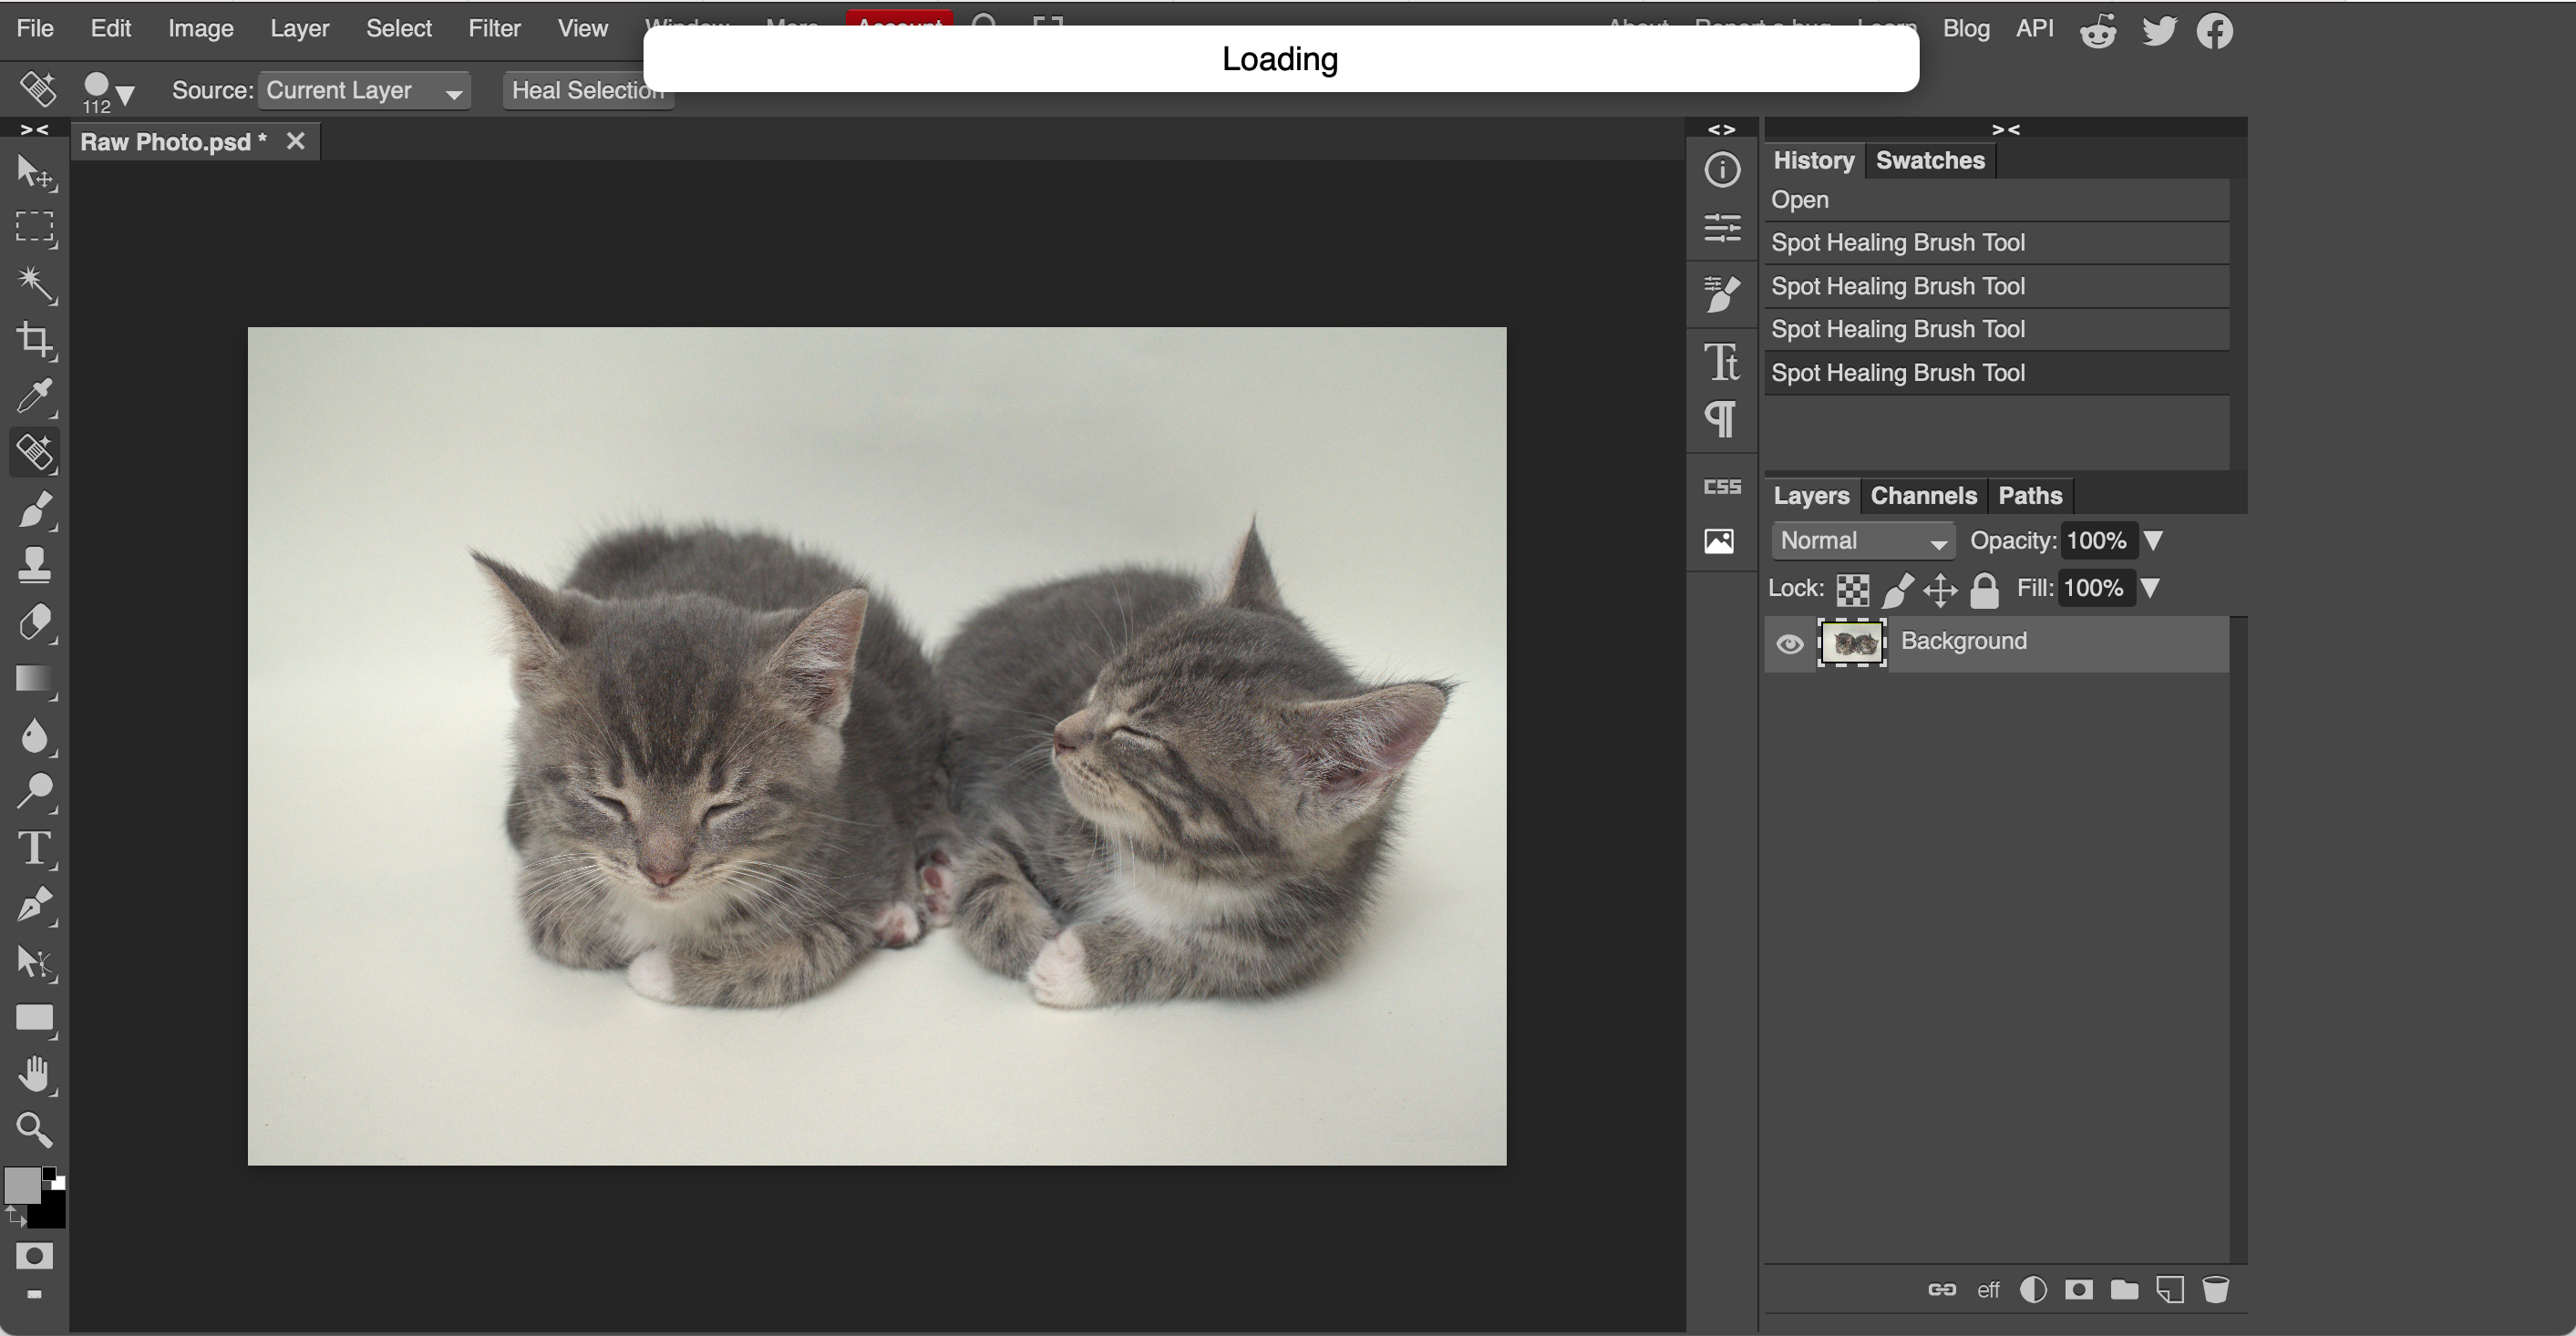 Photopea online image editor is a free Photoshop clone with